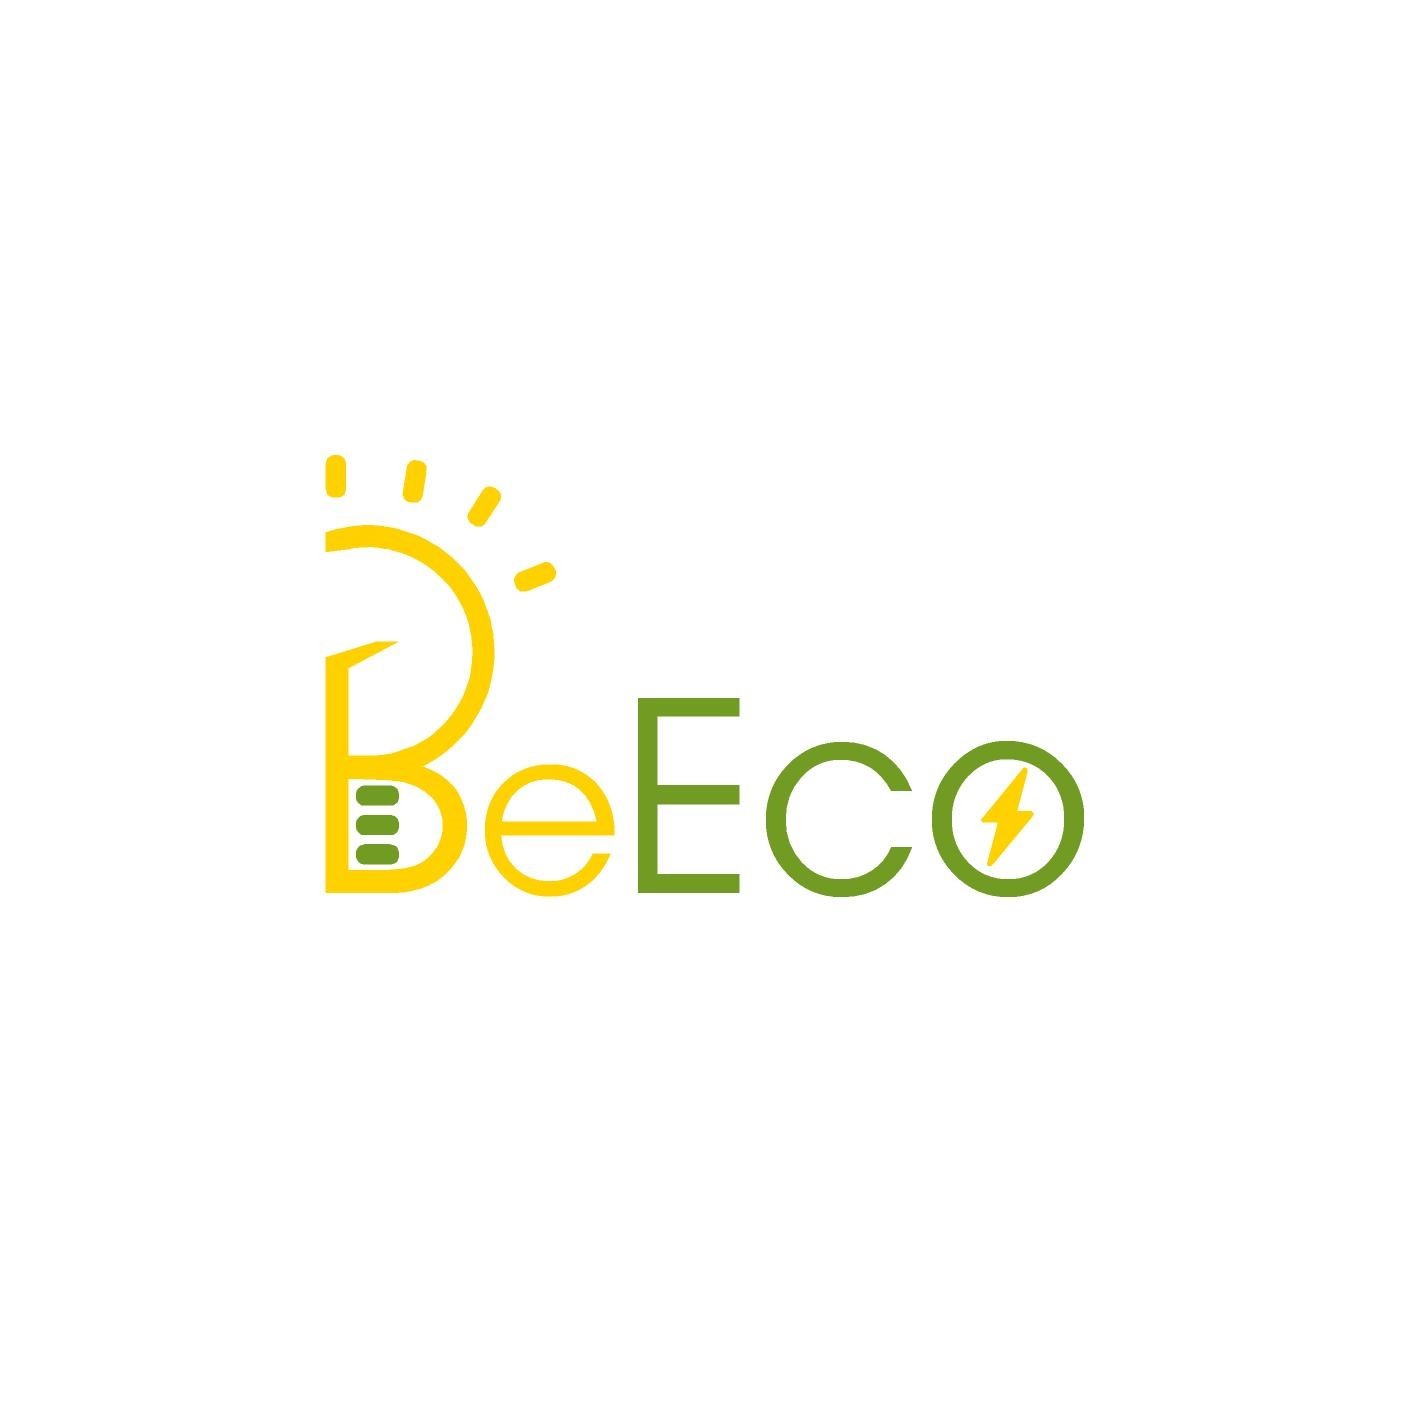 The Be ECO project is postponed for the 2020/2021 school year